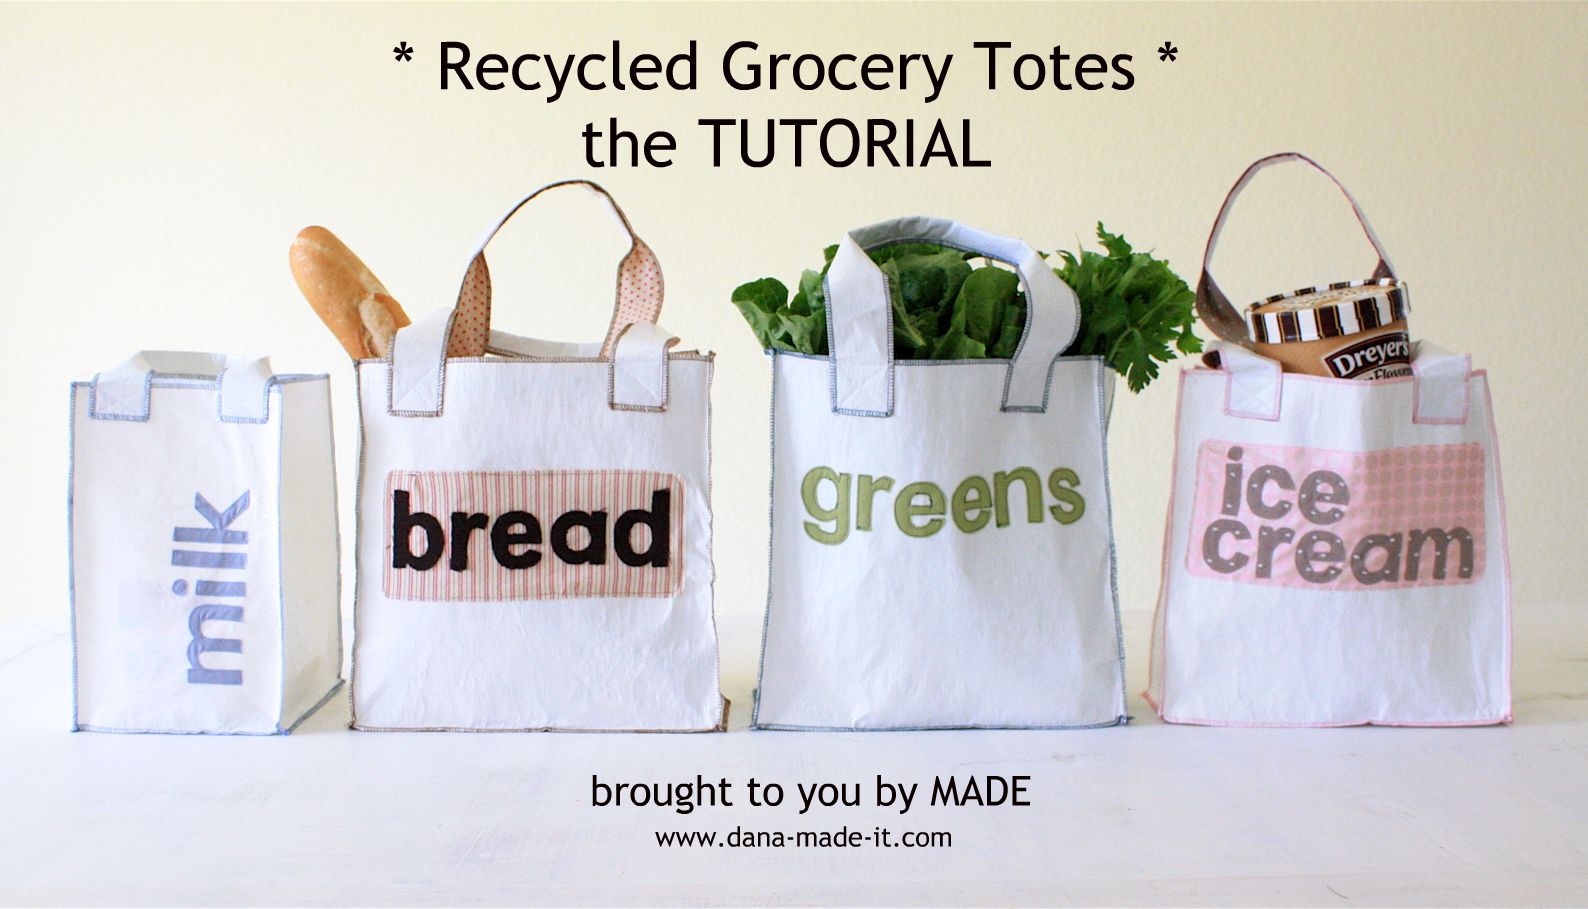 Recycled Grocery Totes - MADE EVERYDAY